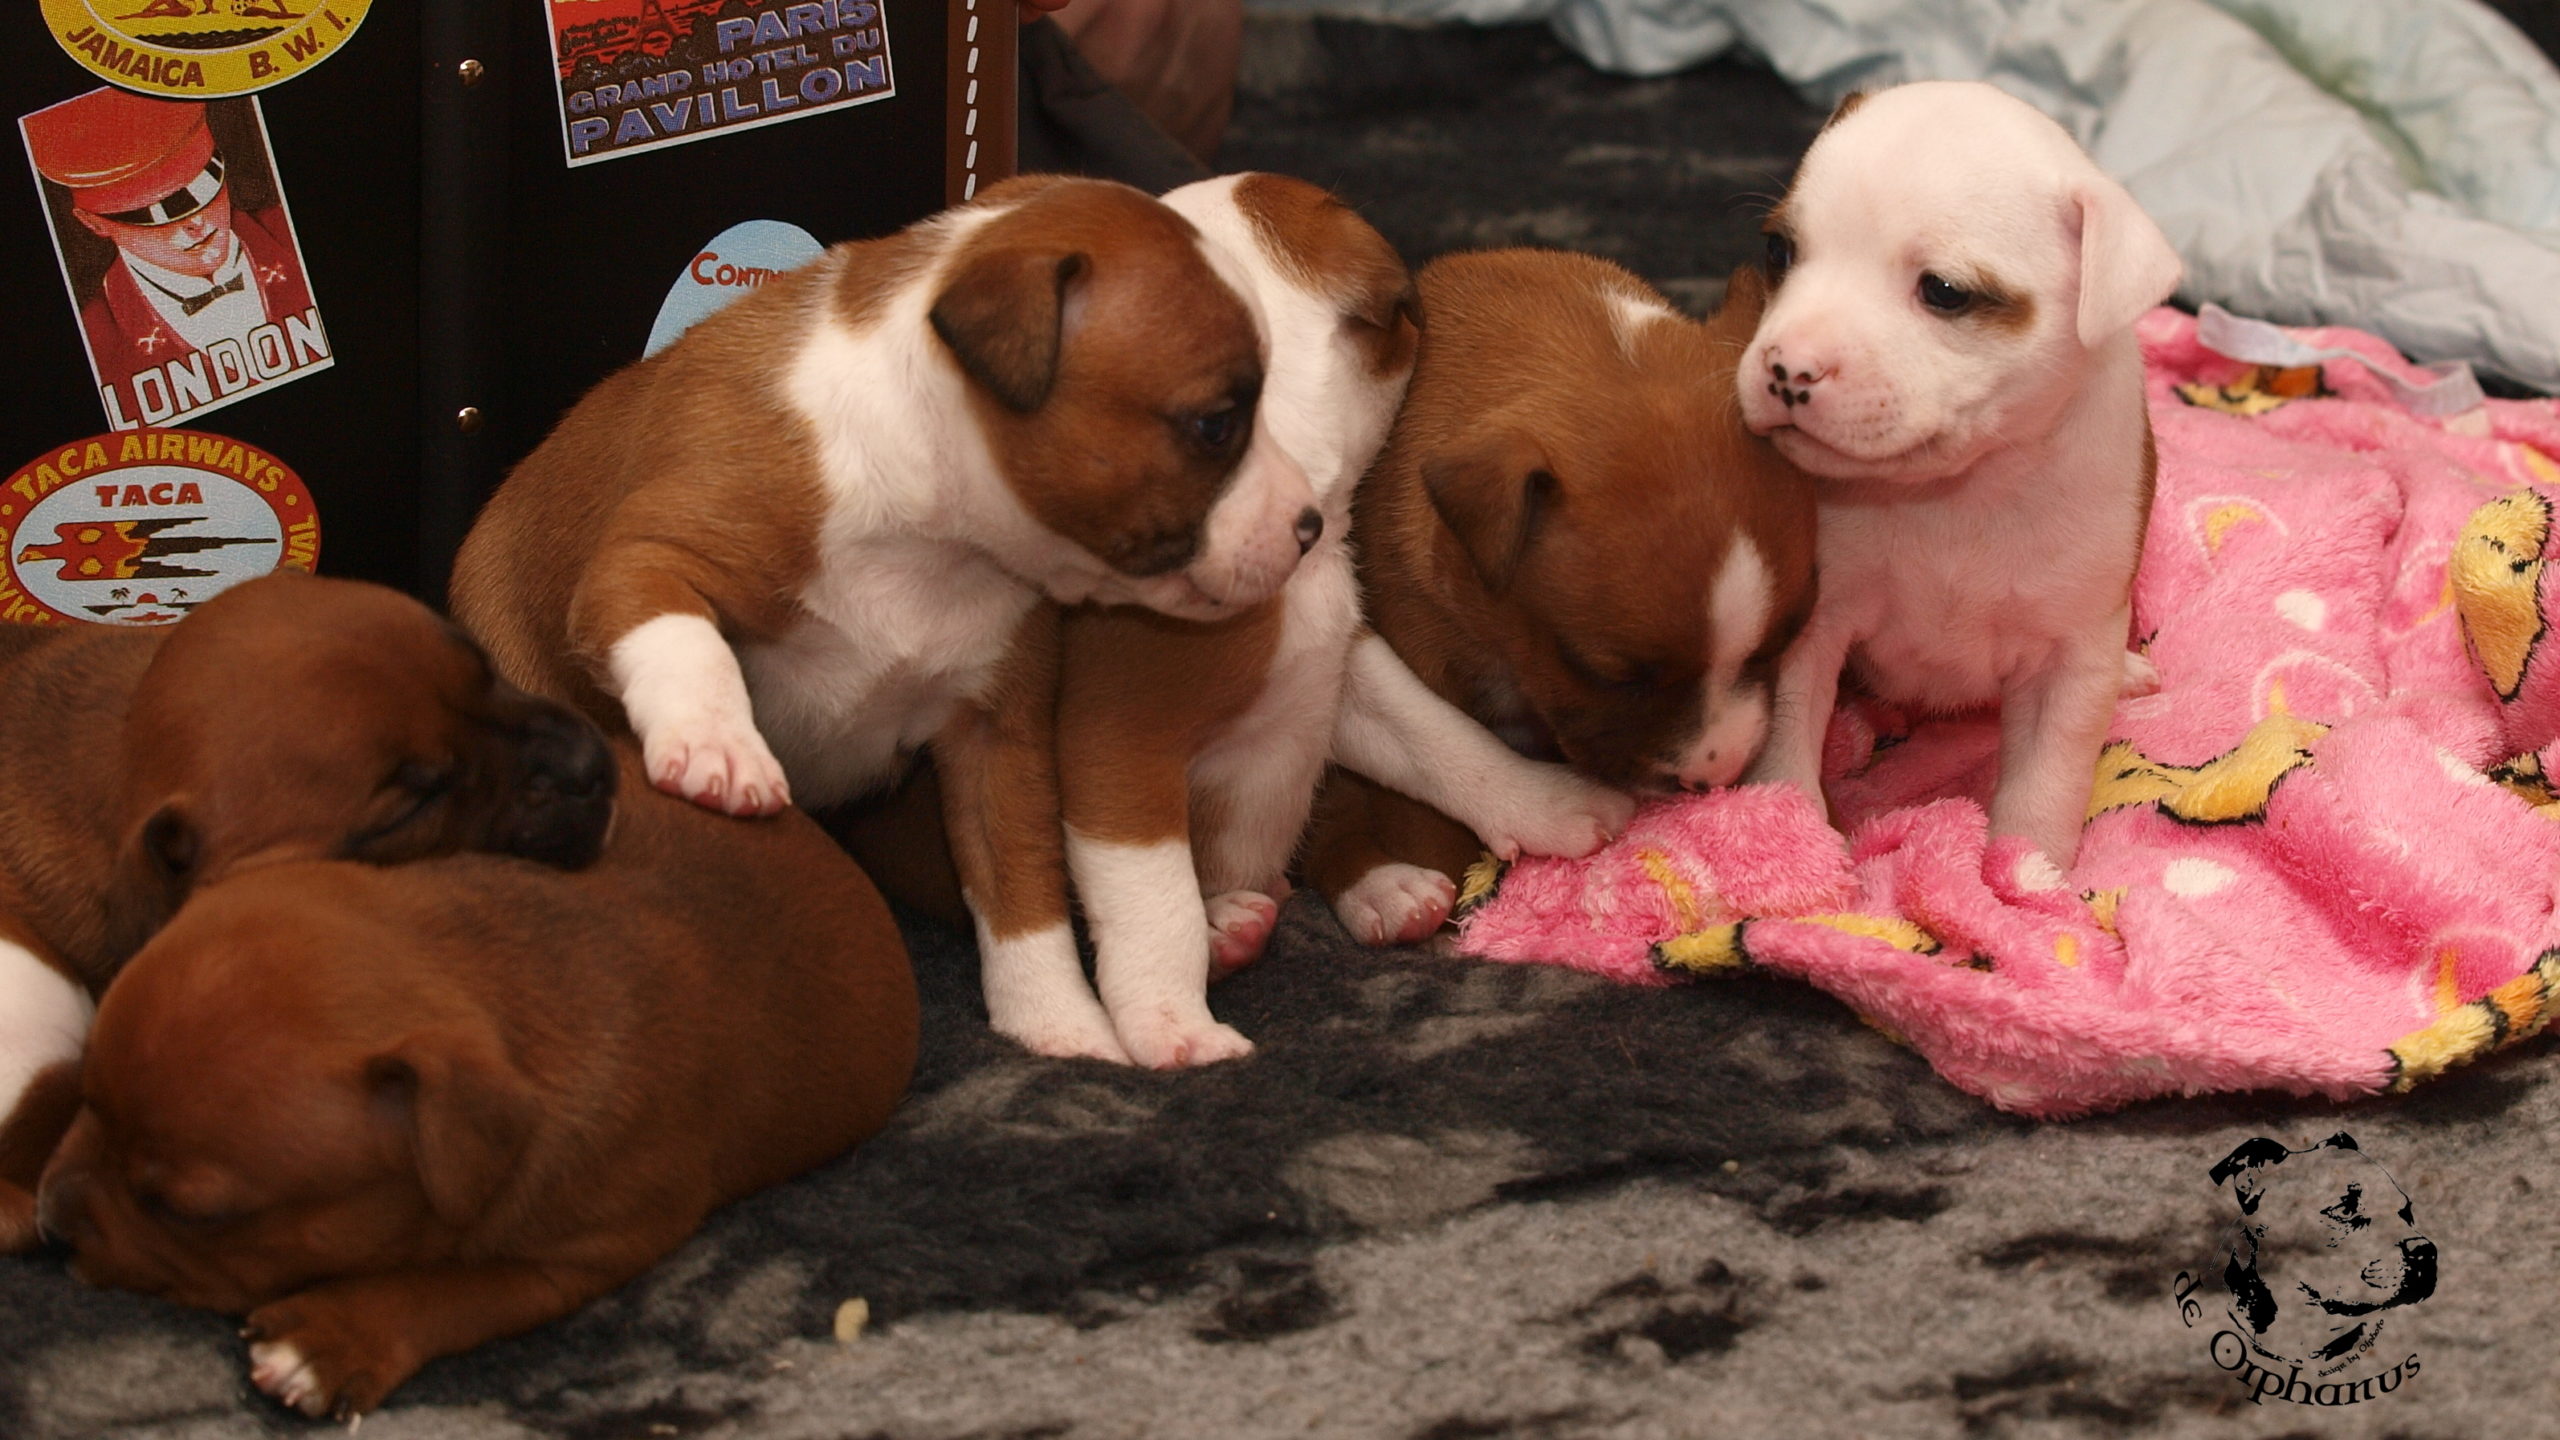 Staffordshire Bull Terrier puppies